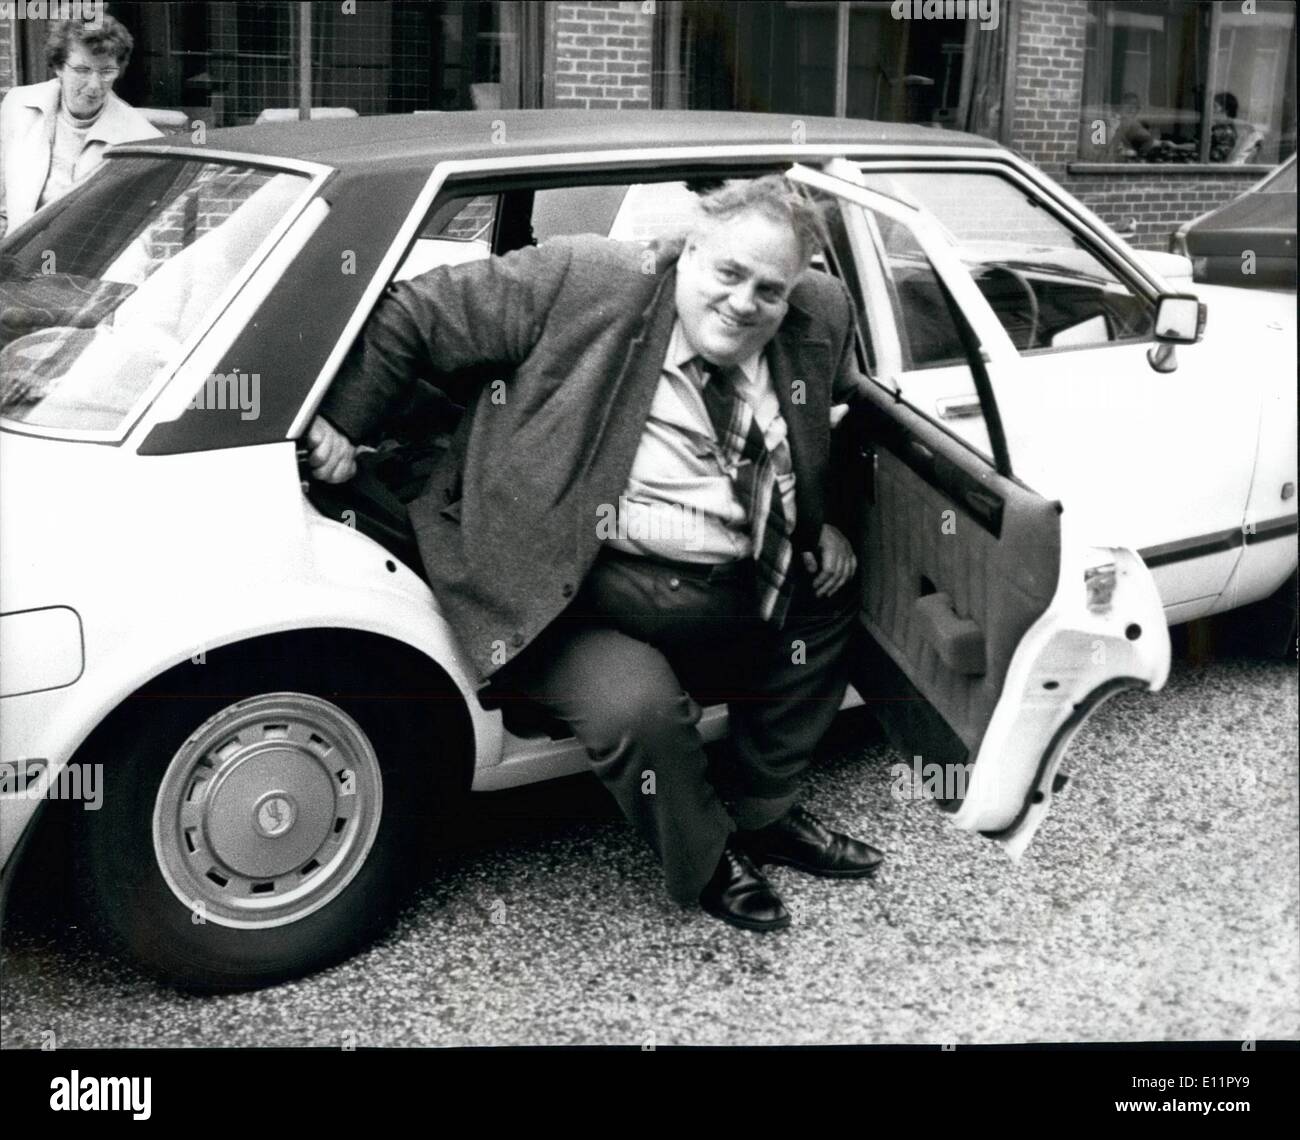 Sep. 09, 1979 - CYRIL SMITH'S MADE-TO-MEASURE CAR. CYRIL SMITH, at 20 stone, Britain's heavyweight M.P. shows off his latest gimmick, a limousine to suit his ample proportions, at the Liberal Party Conference, now taking place at Margate, Kent. It is a Ford Minister, which is basically a ''Stretched'' version of the Ford Granada. Two feet has been added to the Chassis and the rear door widened. PHOTO SHOWS: CYRIL SMITH arriving at the assembly in Margate yesterday in his special wide-door car. Stock Photo